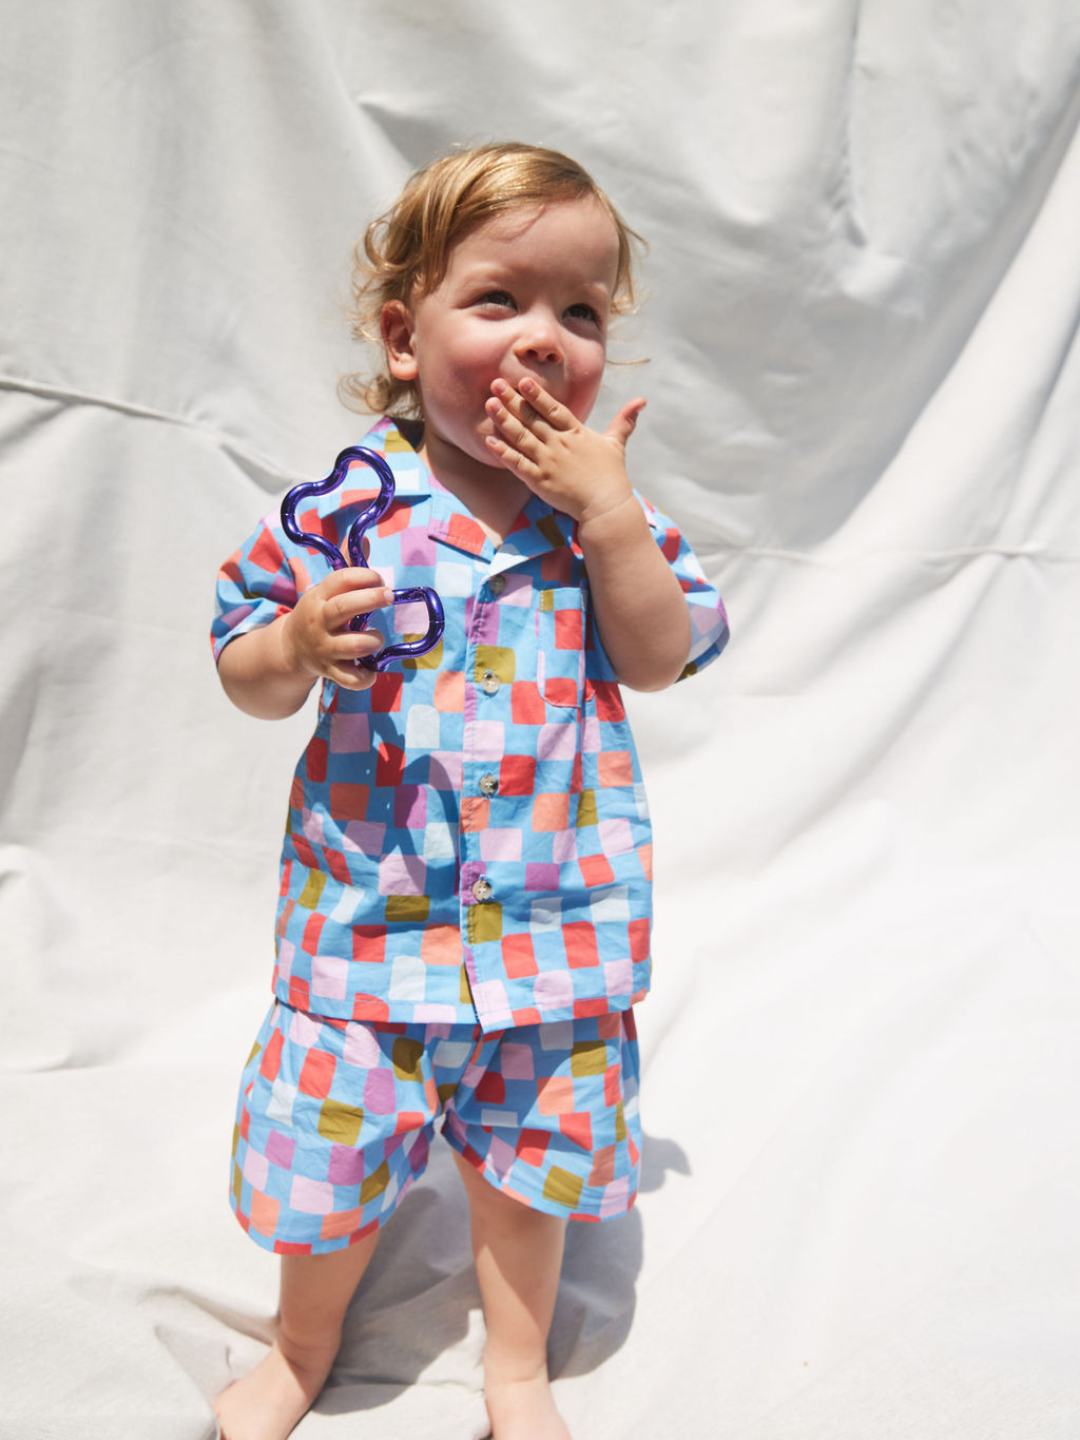 Blue | A toddler wearing a kids' shirt and shorts set in a pattern of red, orange, pink, lilac and green squares on a blue background